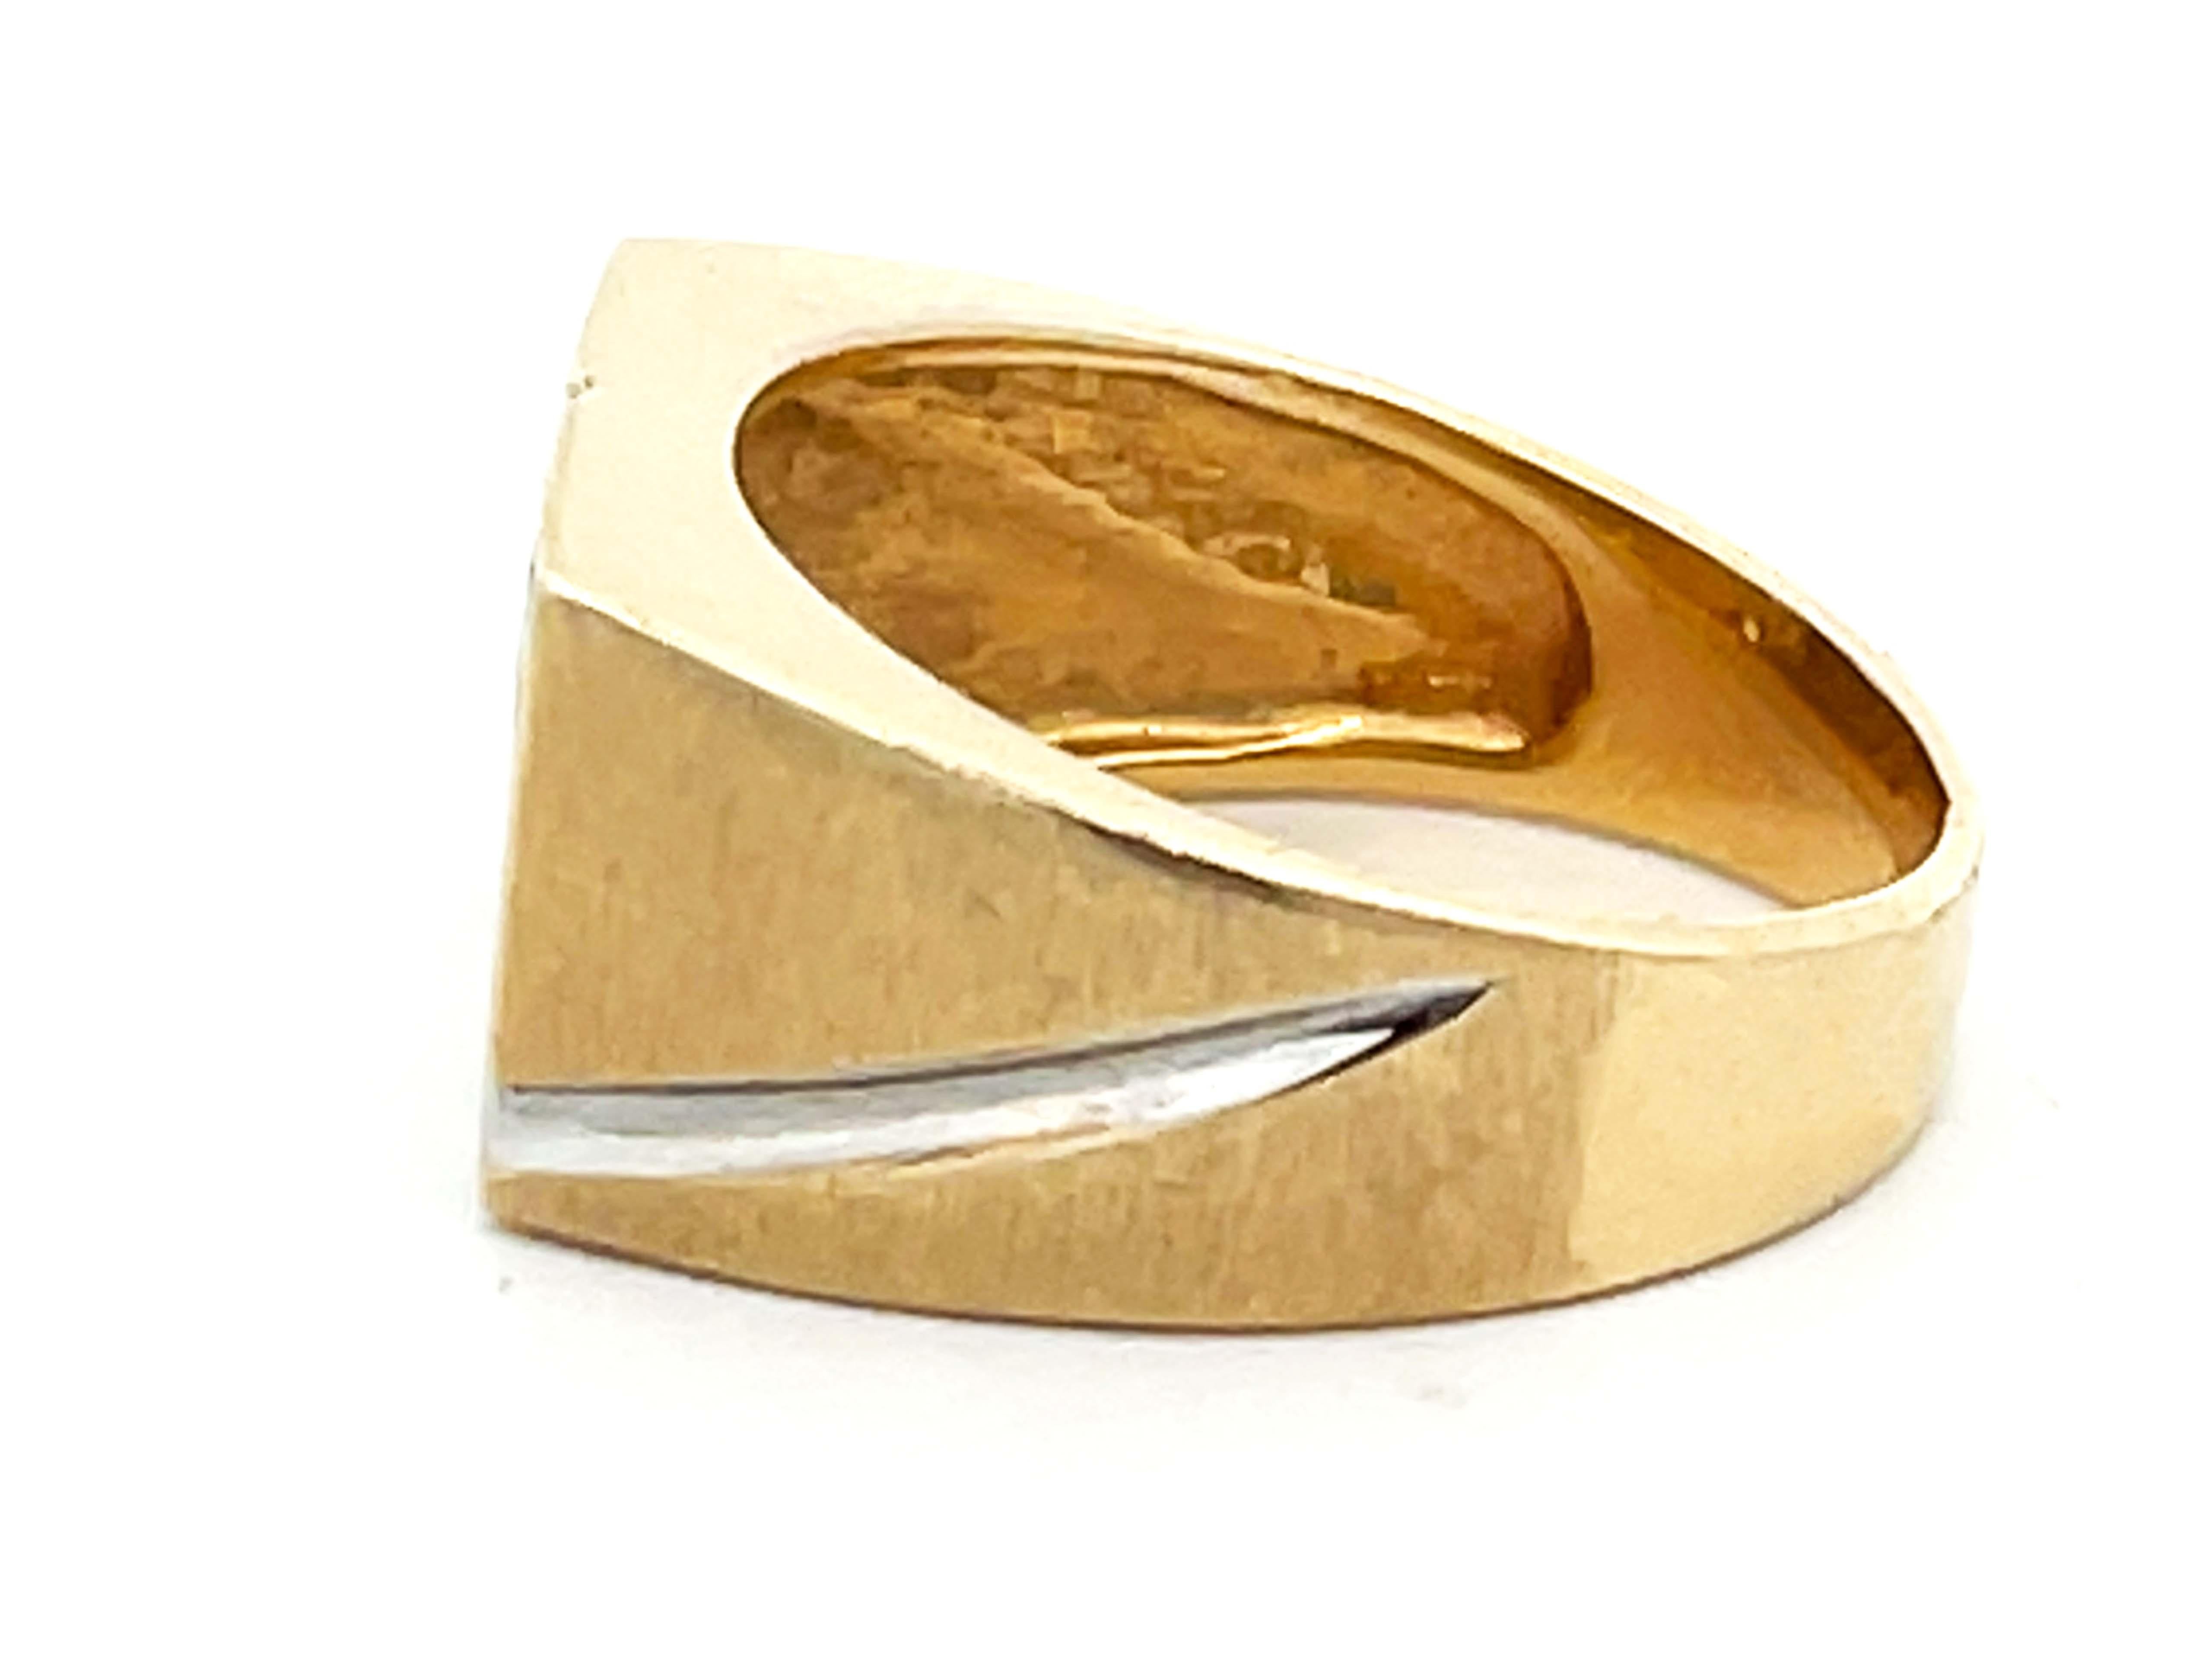 Levian Fan Design Diamond 2-Toned Mens Ring in 14k Gold In Excellent Condition For Sale In Honolulu, HI